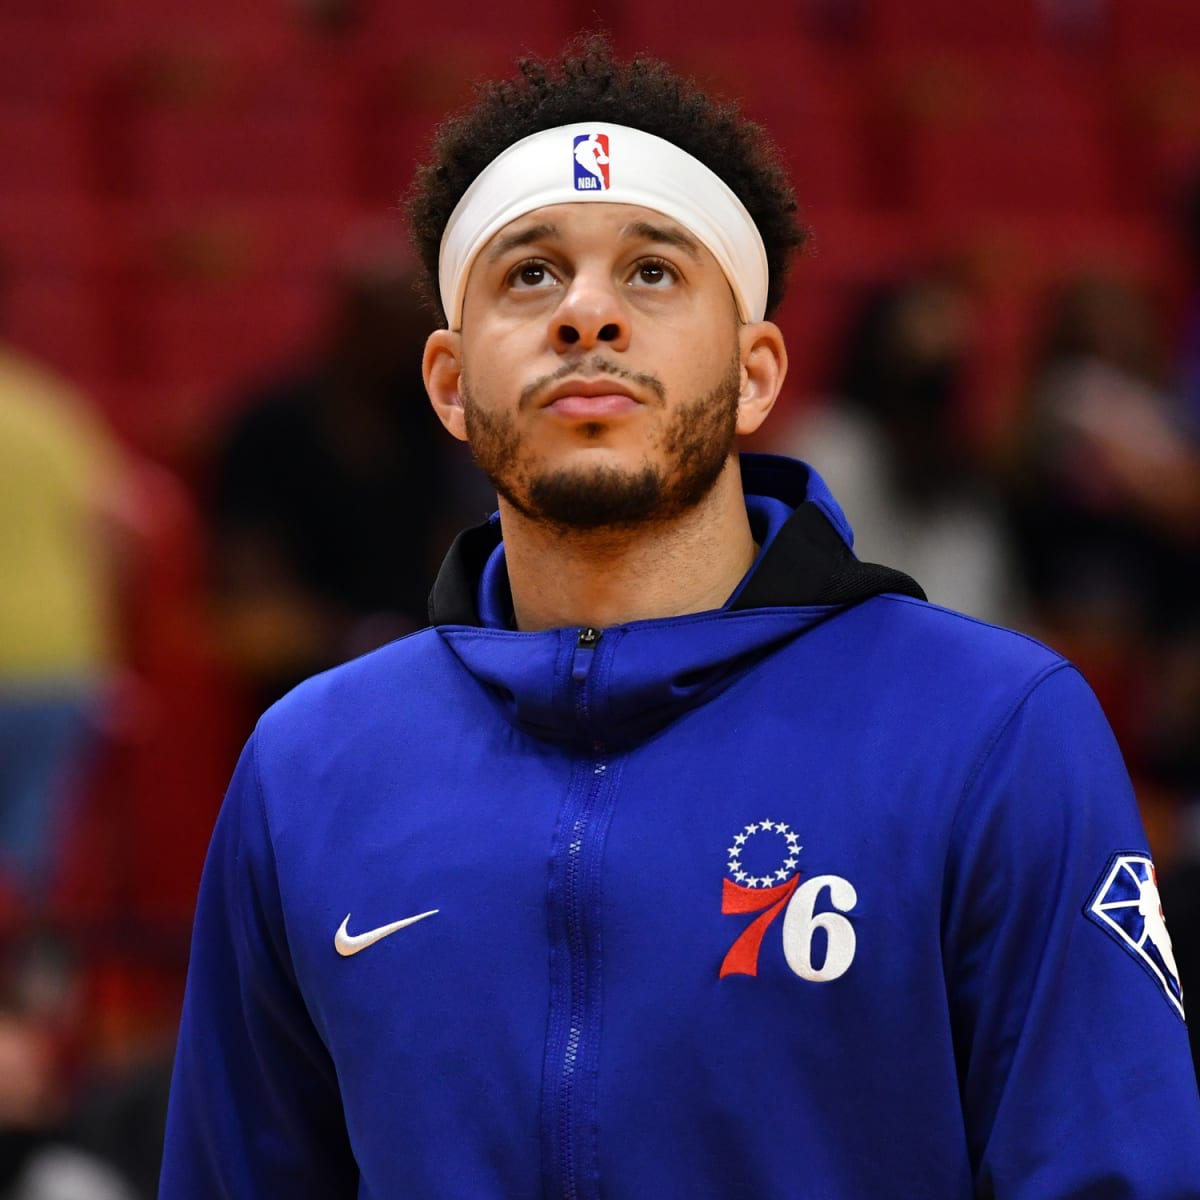 No boos in Philly for Nets' Seth Curry, but trade from 76ers was tough -  Newsday